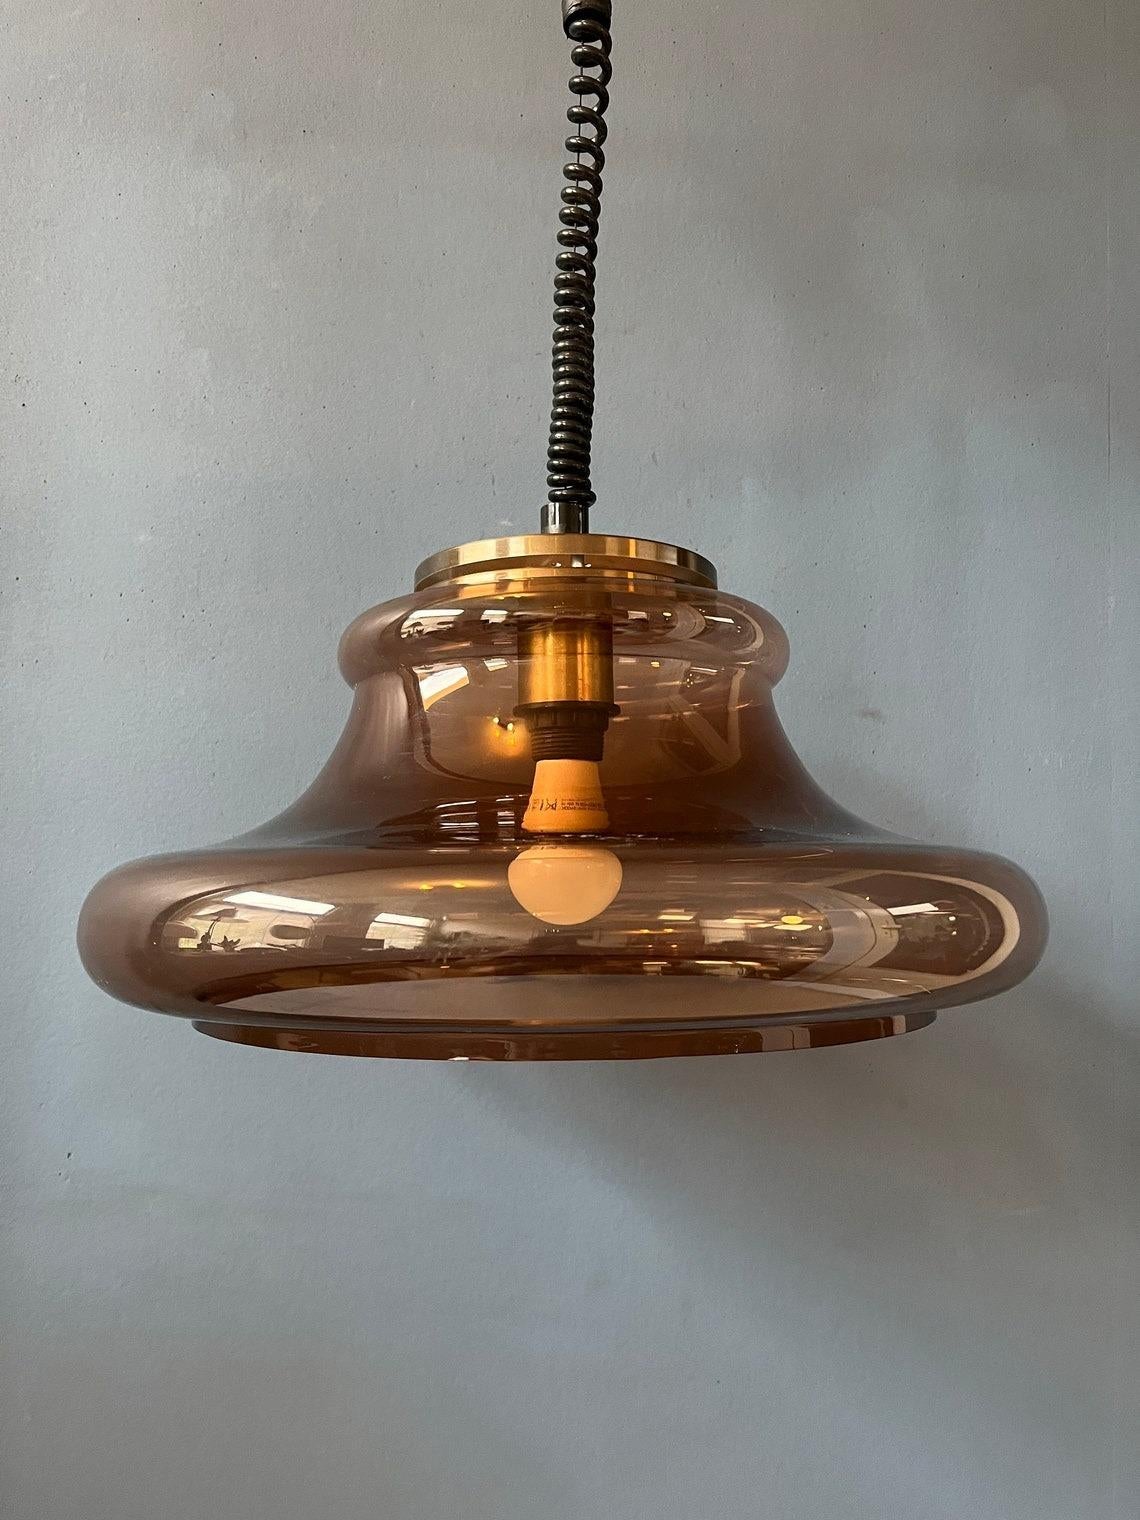 Mid Century Vintage Space Age Pendant Light Ceiling Lamp by Herda, 1970s For Sale 1